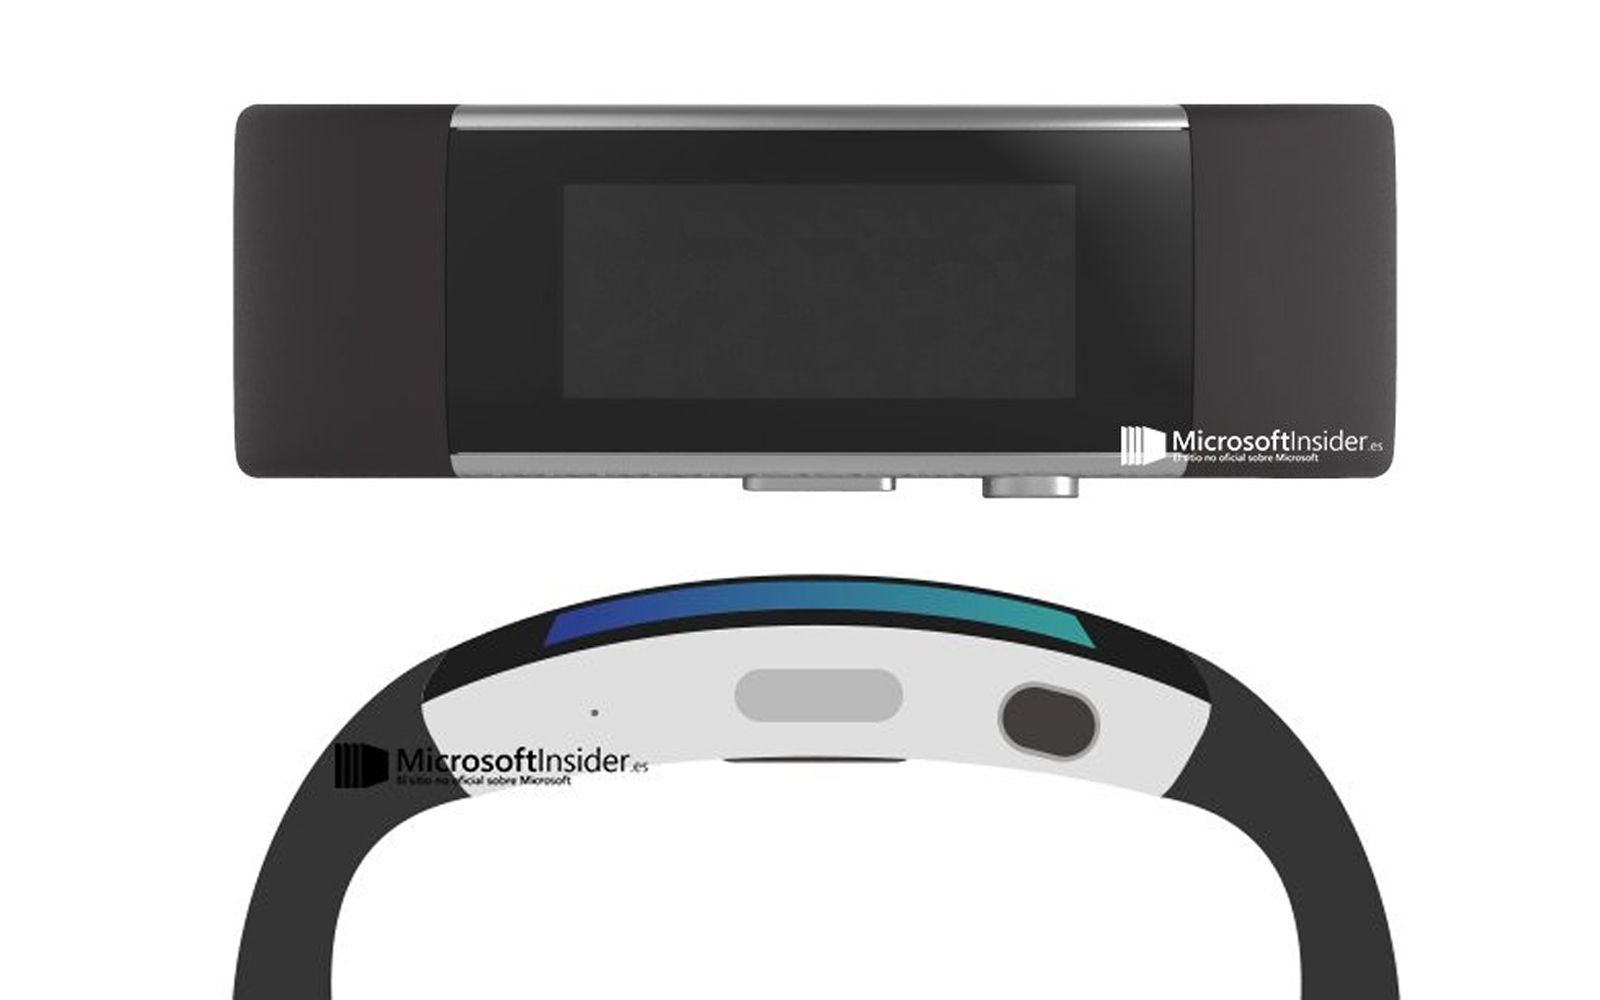 microsoft band 2 may fix comfort issues with curved screen flexible strap and more image 2